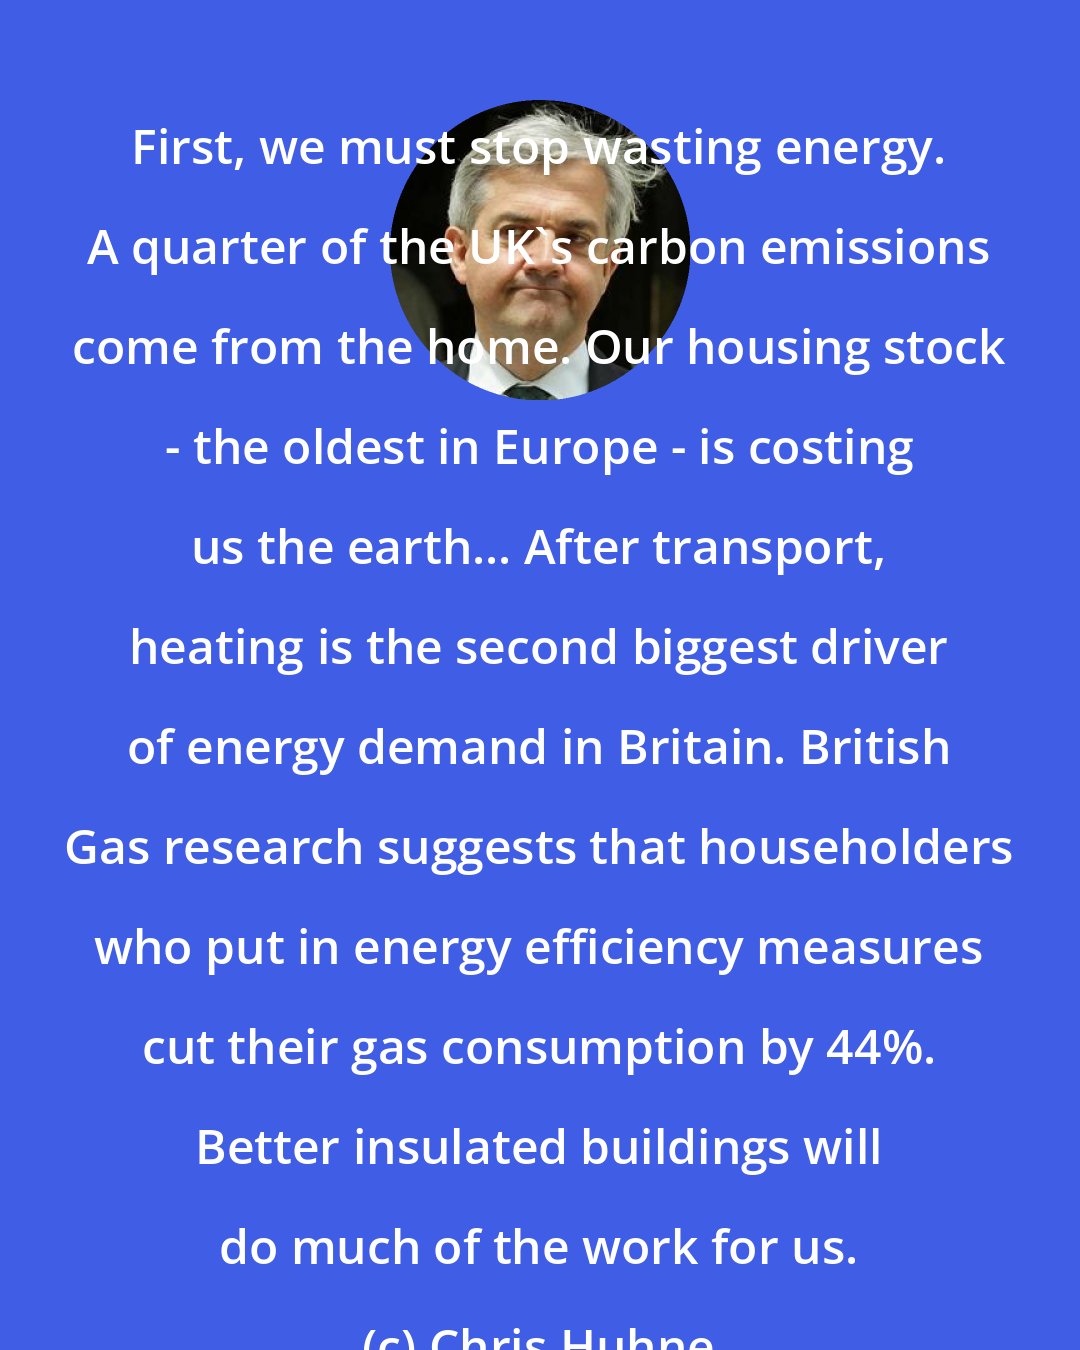 Chris Huhne: First, we must stop wasting energy. A quarter of the UK's carbon emissions come from the home. Our housing stock - the oldest in Europe - is costing us the earth... After transport, heating is the second biggest driver of energy demand in Britain. British Gas research suggests that householders who put in energy efficiency measures cut their gas consumption by 44%. Better insulated buildings will do much of the work for us.